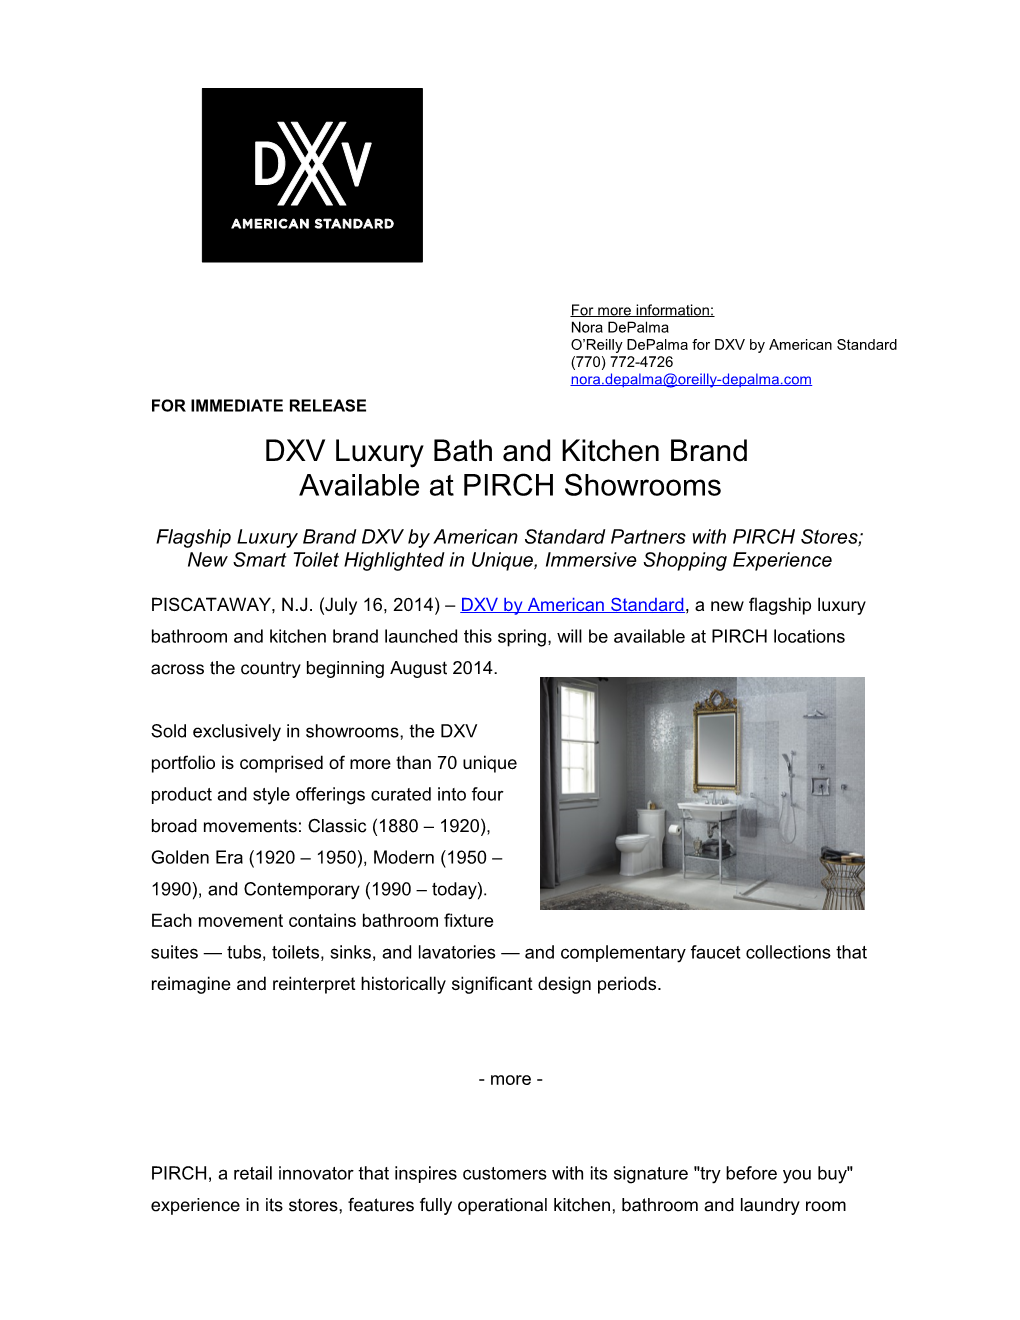 DXV Luxury Bath and Kitchen Brand Available at PIRCH Showrooms3-3-3